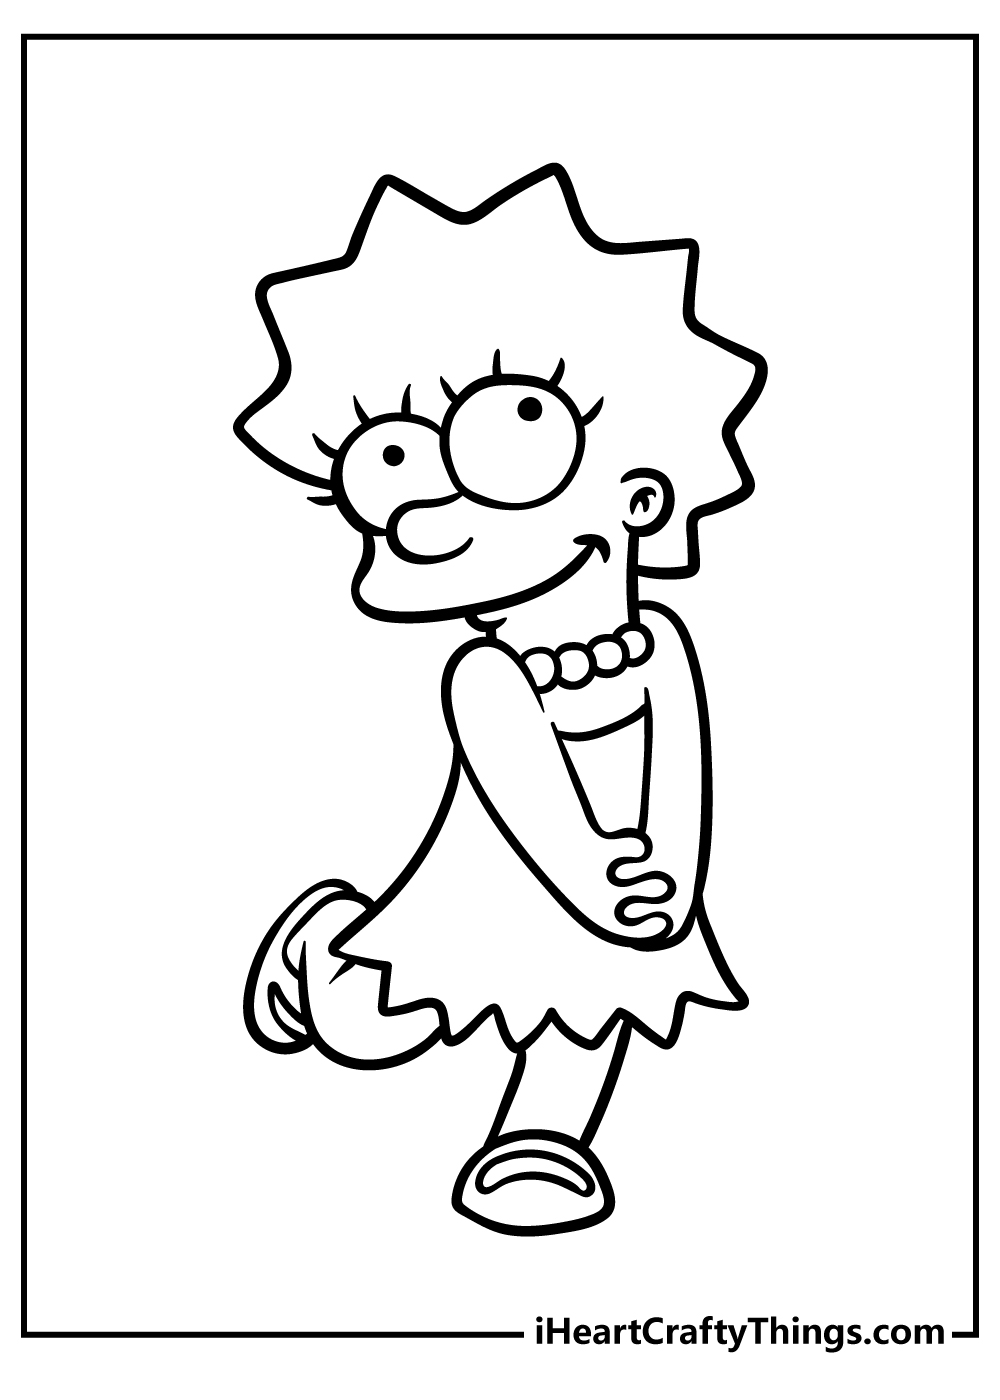 Simpsons Coloring Book for adults free download